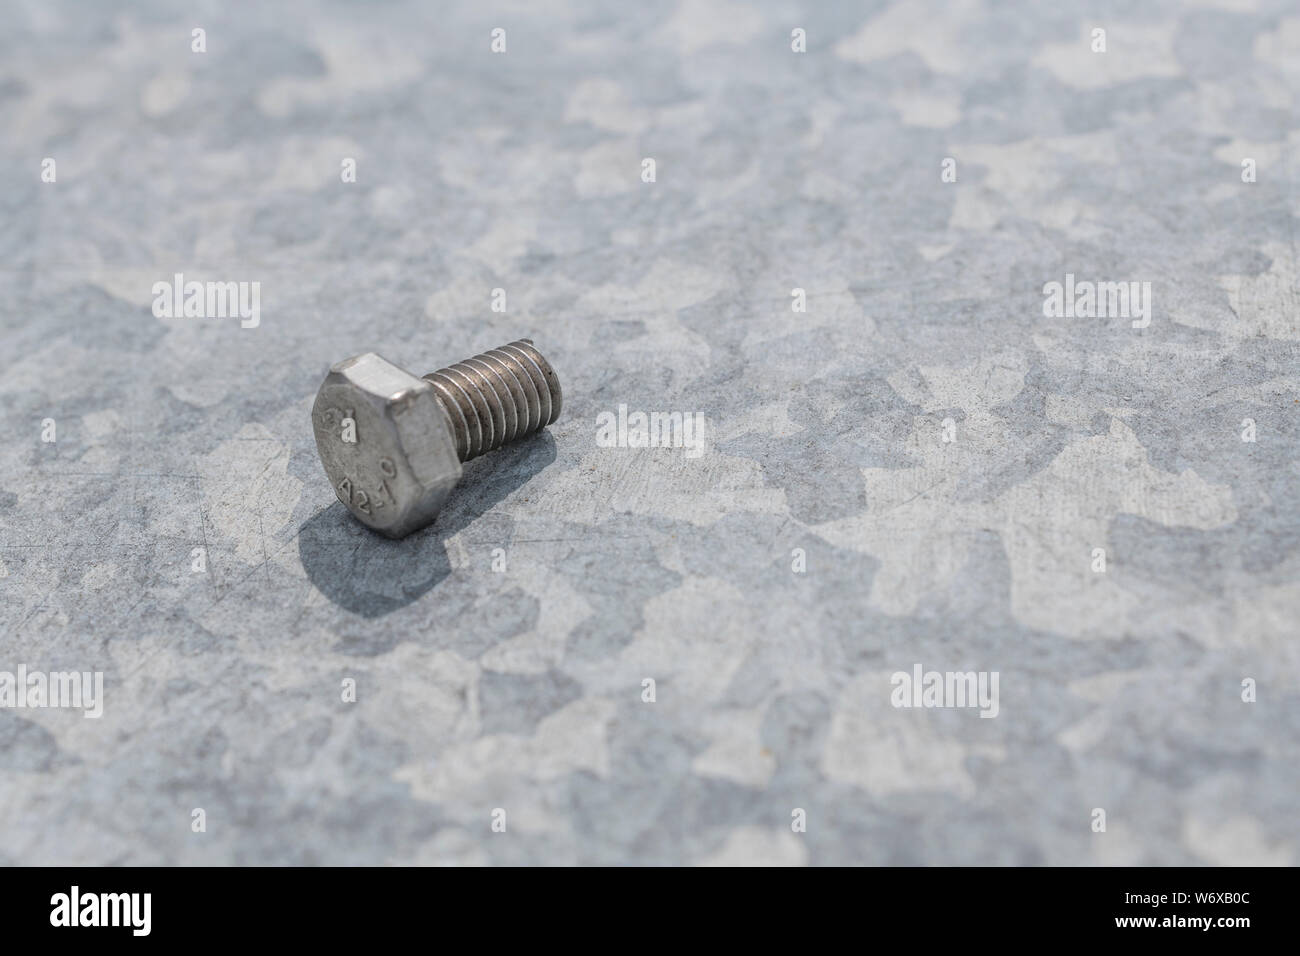 Steel hex bolt on zinc coated galvanised sheet metal with spangle evident. Concept metal fixings, industrial fasteners, coated steel, metalwork, bolt. Stock Photo